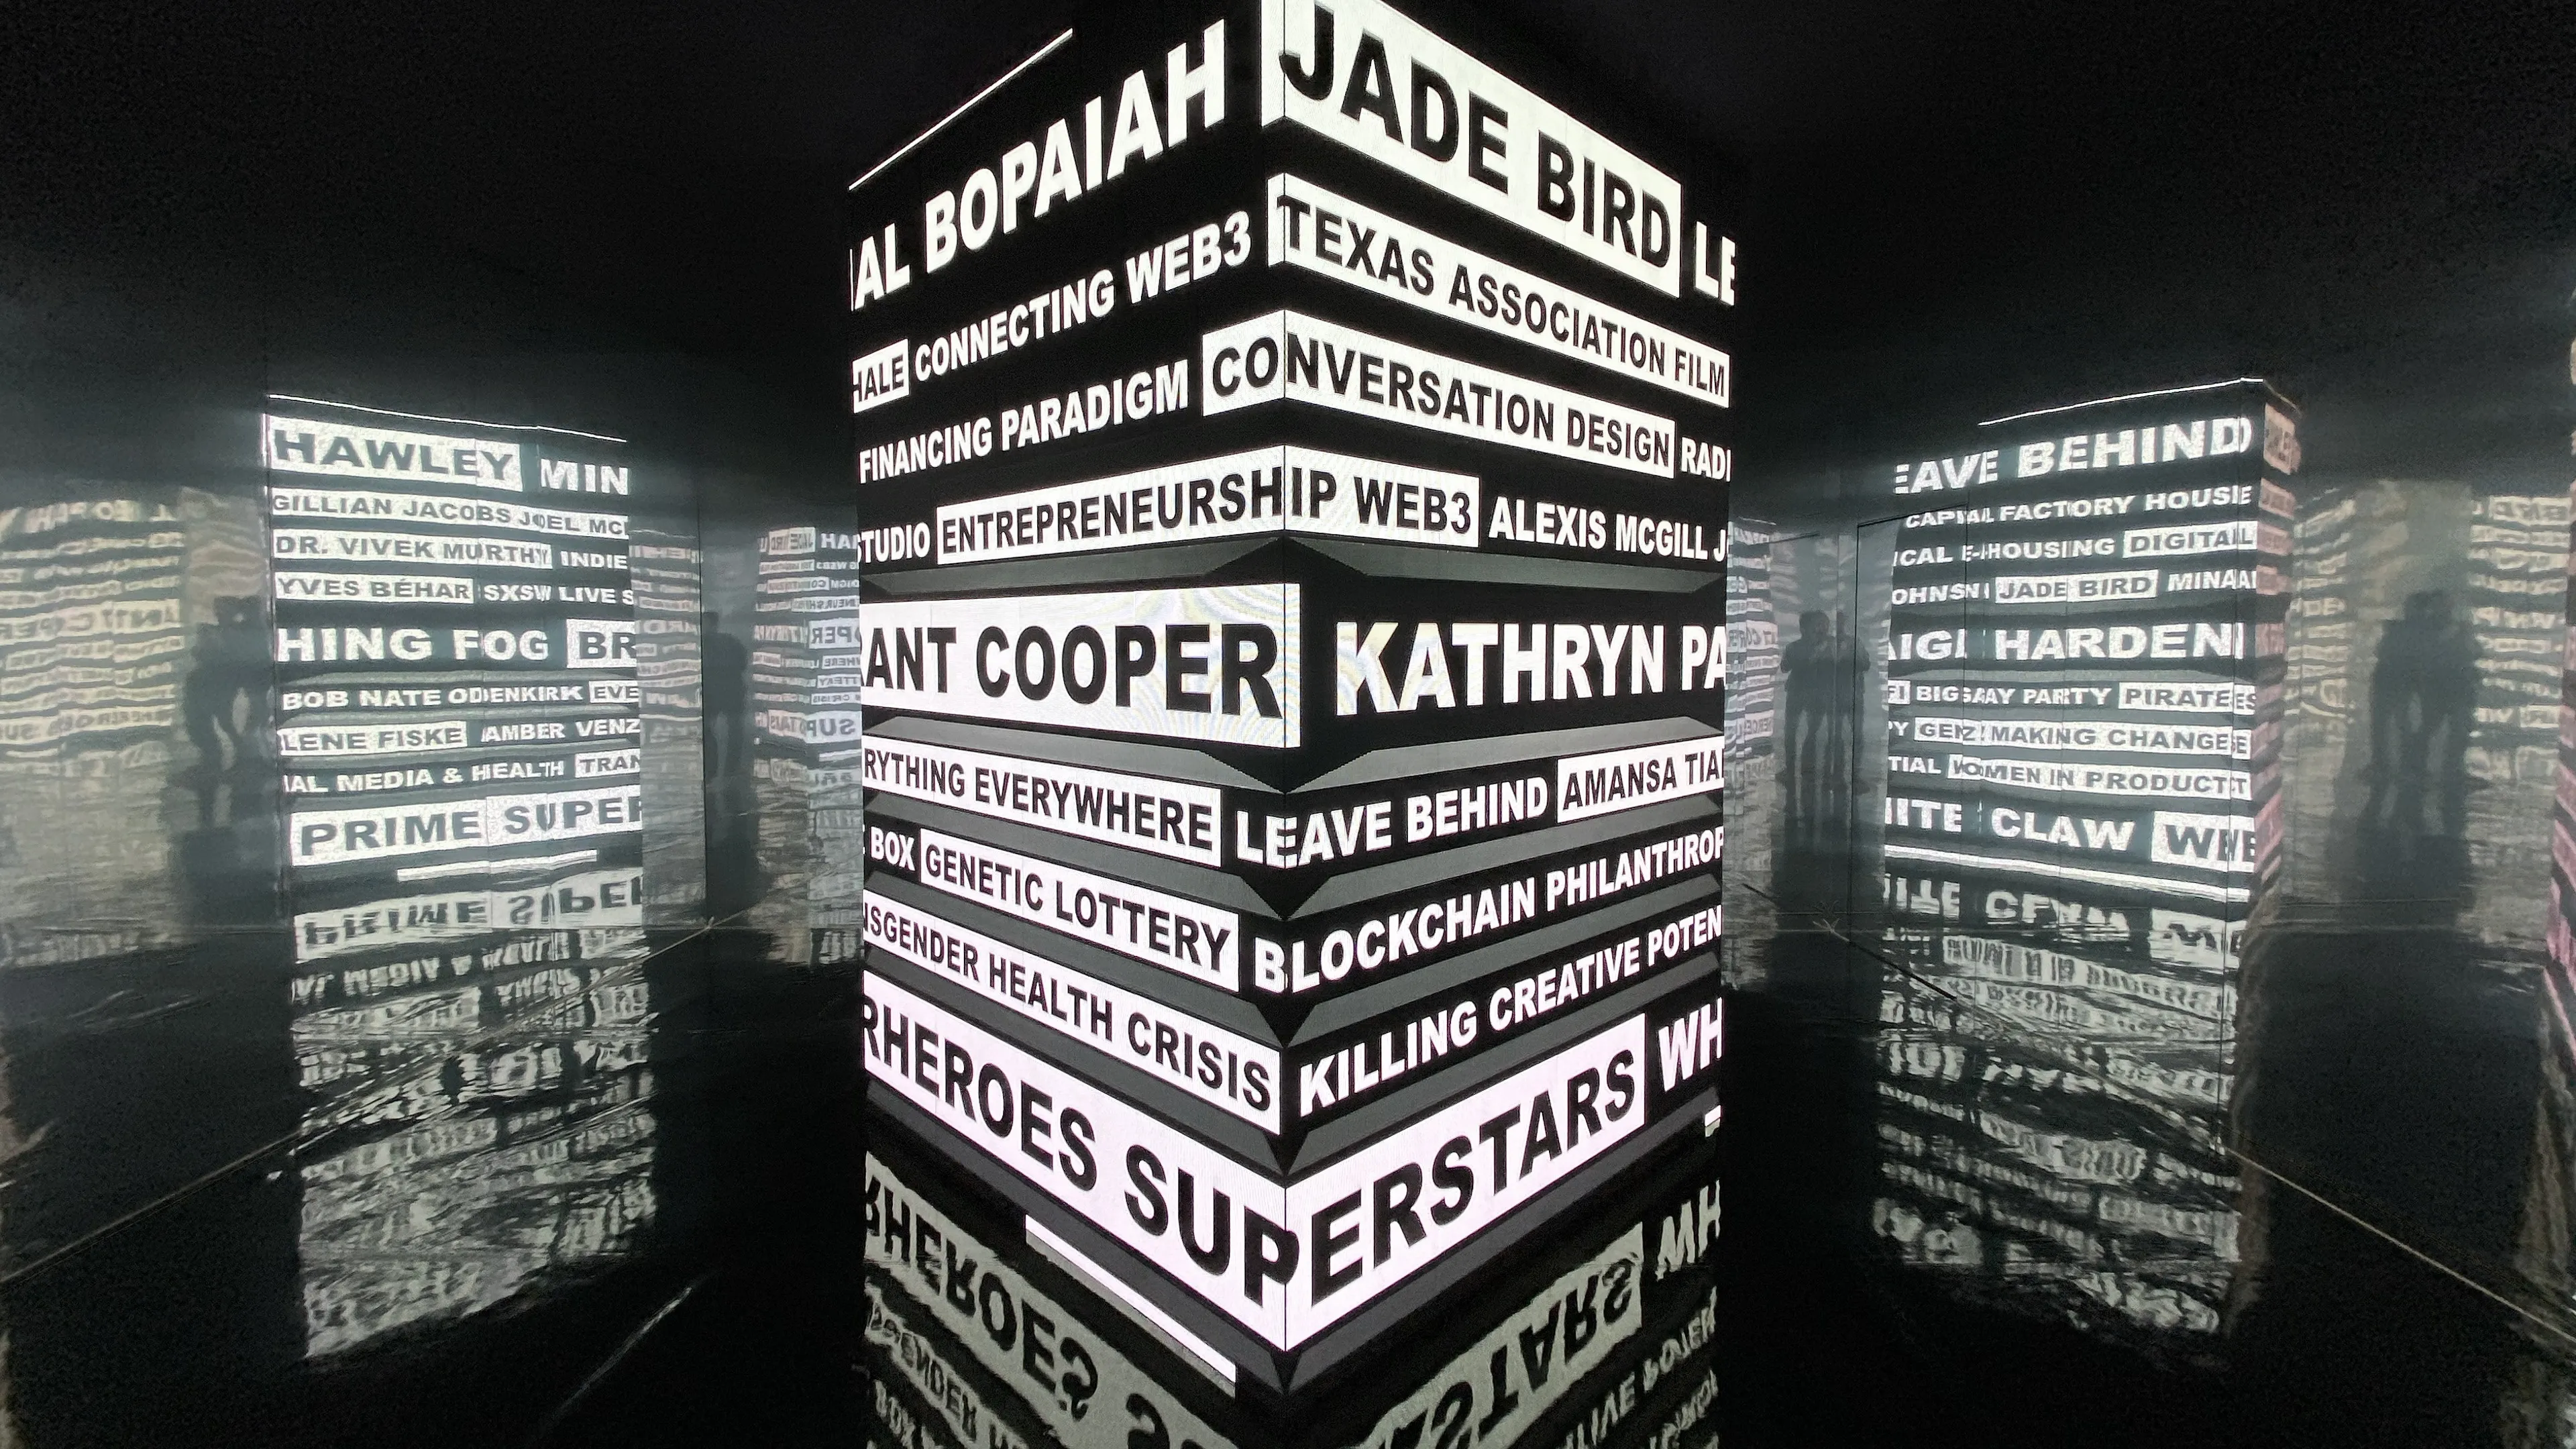 An interactive art installation showcases an LED cube at the center of a room encased in mirrored walls. The cube cycles through black and white typography, prominently listing the names of bands featured at SXSW 2022.